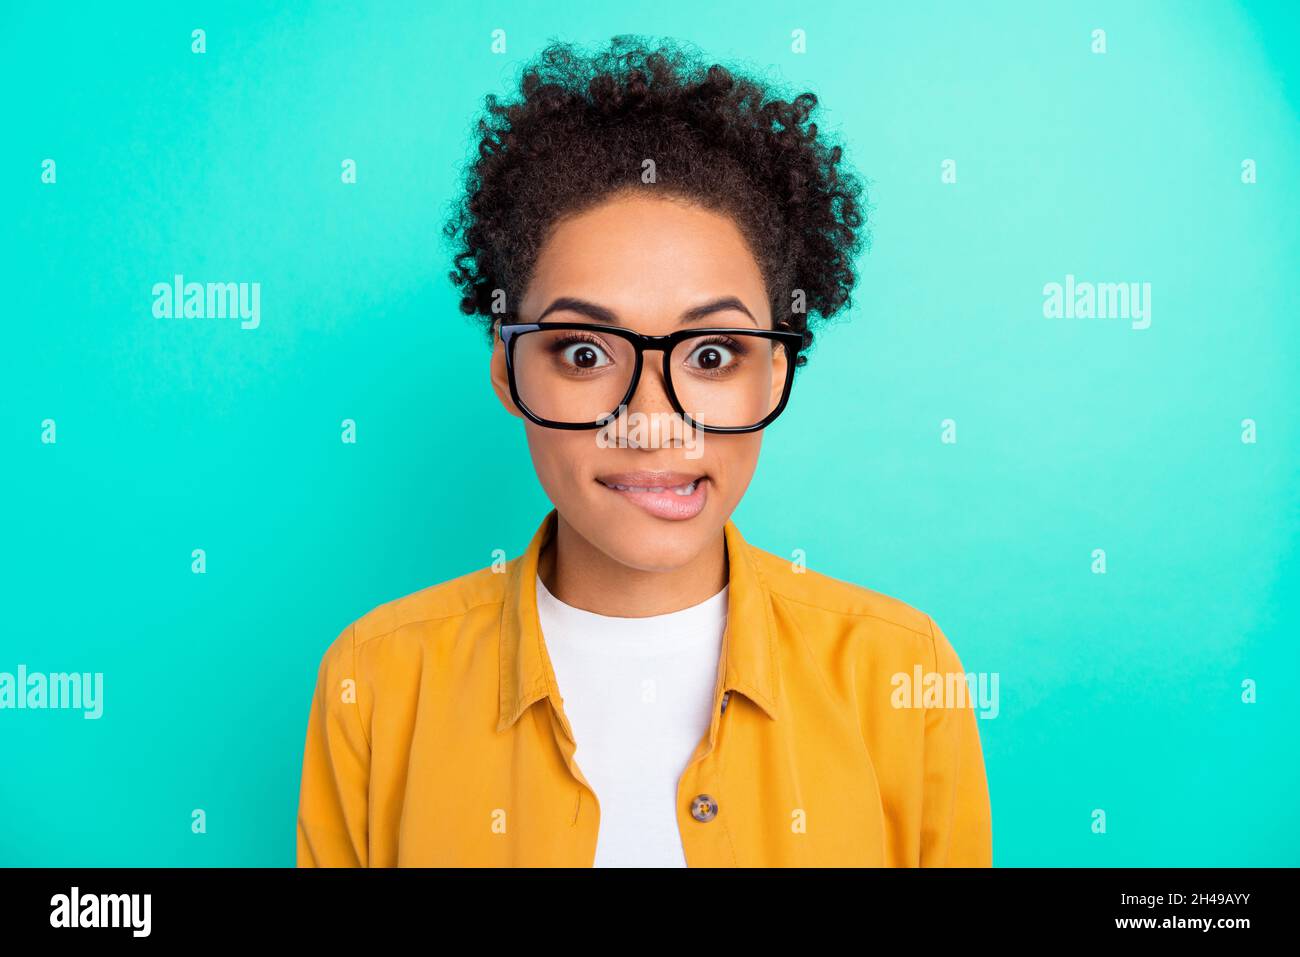 Photo portrait girl curly hairstyle wearing glasses biting lip isolated vivid teal color background Stock Photo